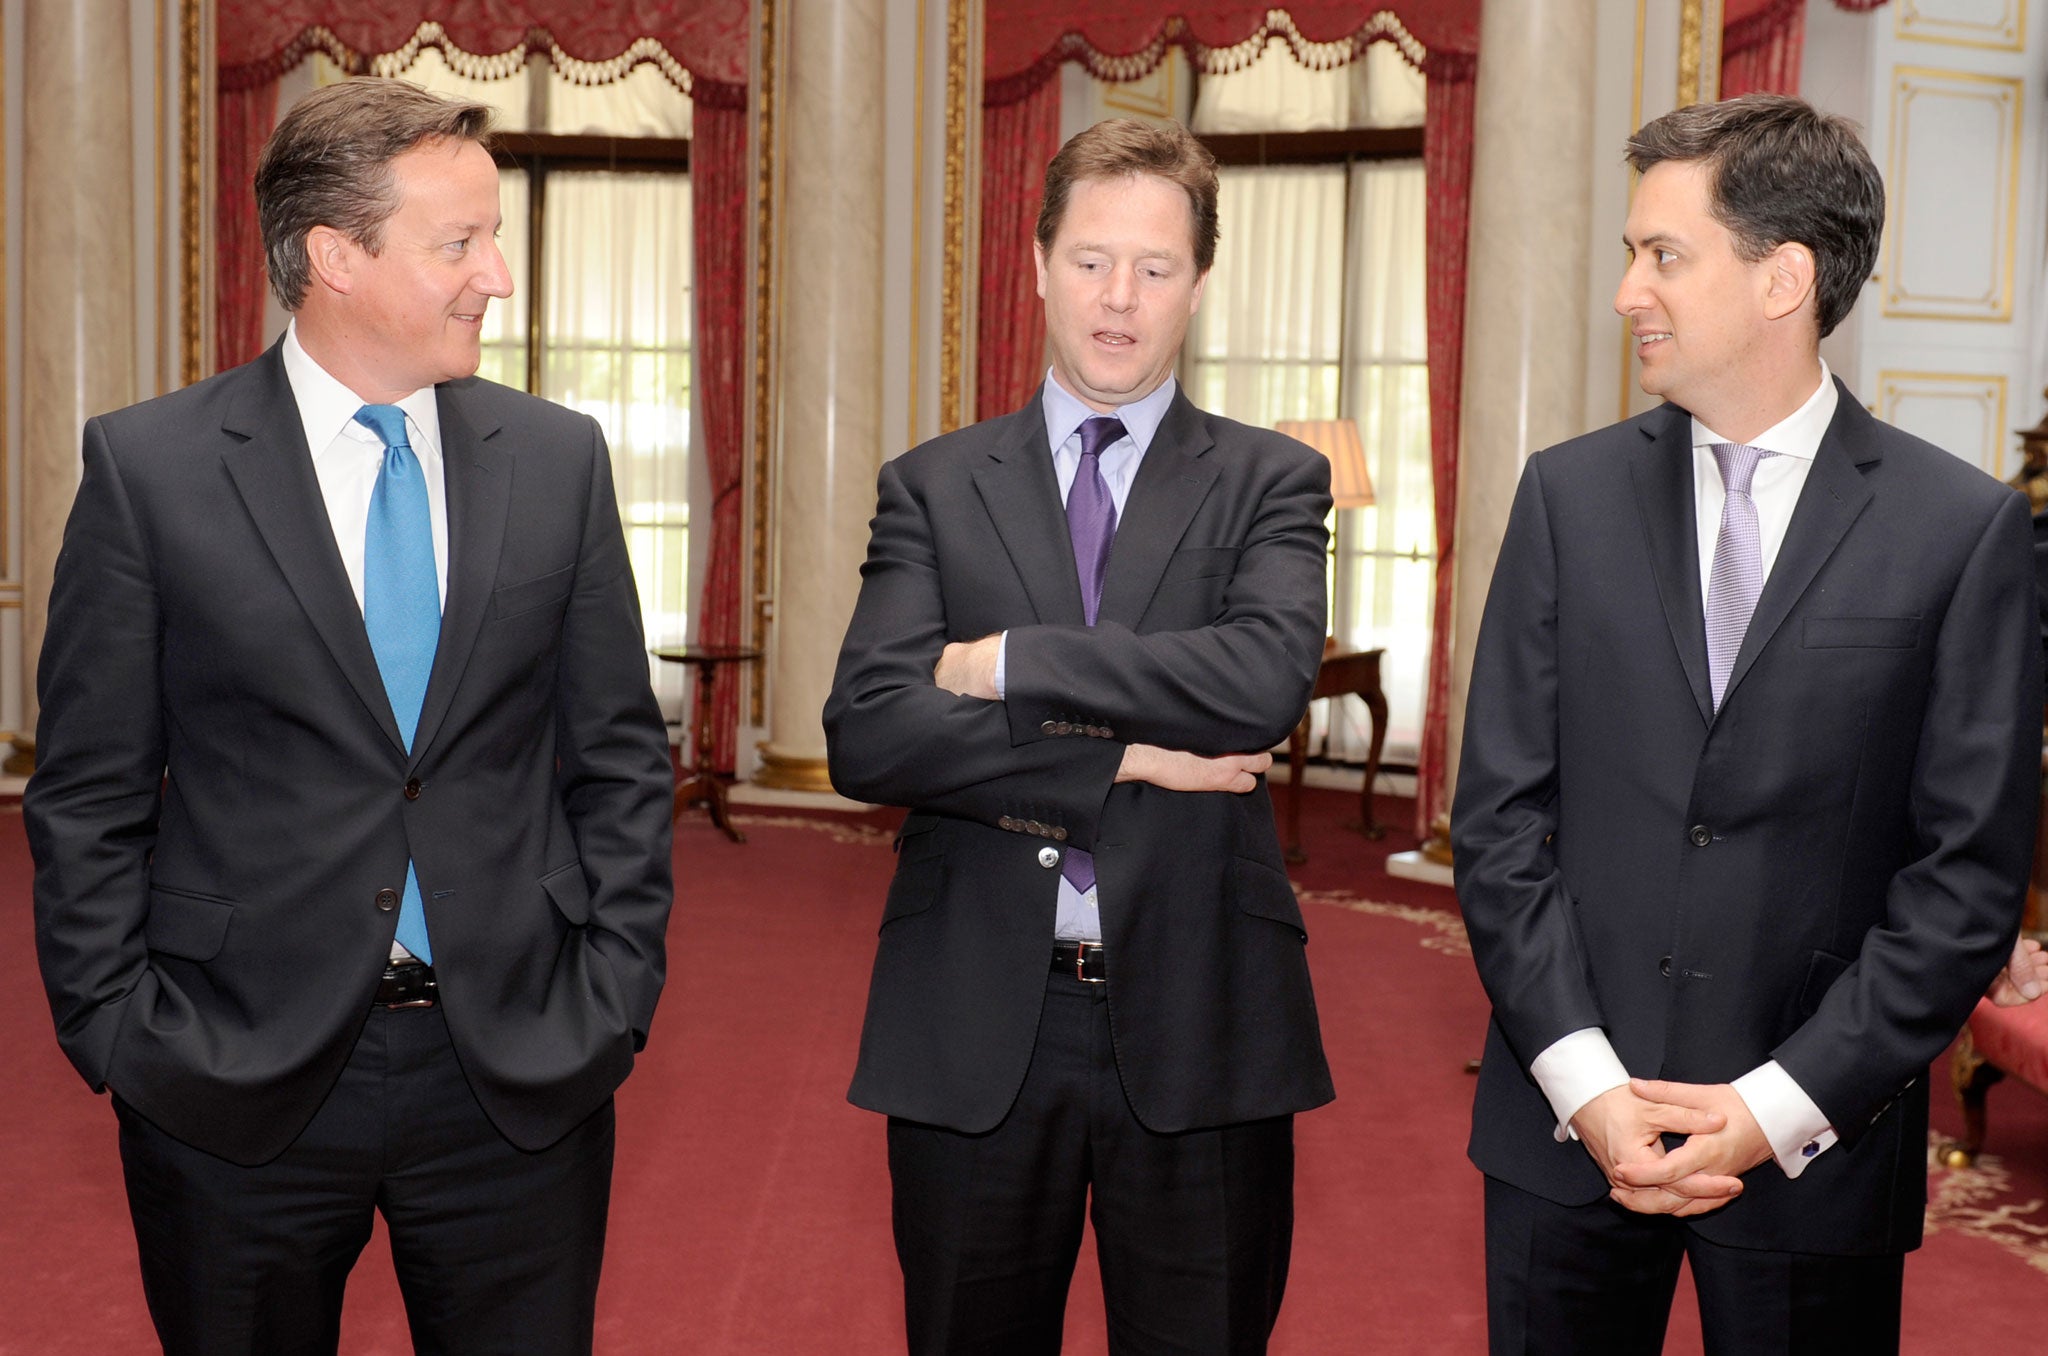 Prime Minister David Cameron (L), Deputy Prime Minister Nick Clegg (C) and Labour party leader Ed Miliband attend a ceremony at Buckingham Palace to mark the Duke of Edinburgh's 90th birthday on June 30, 2011 in London.